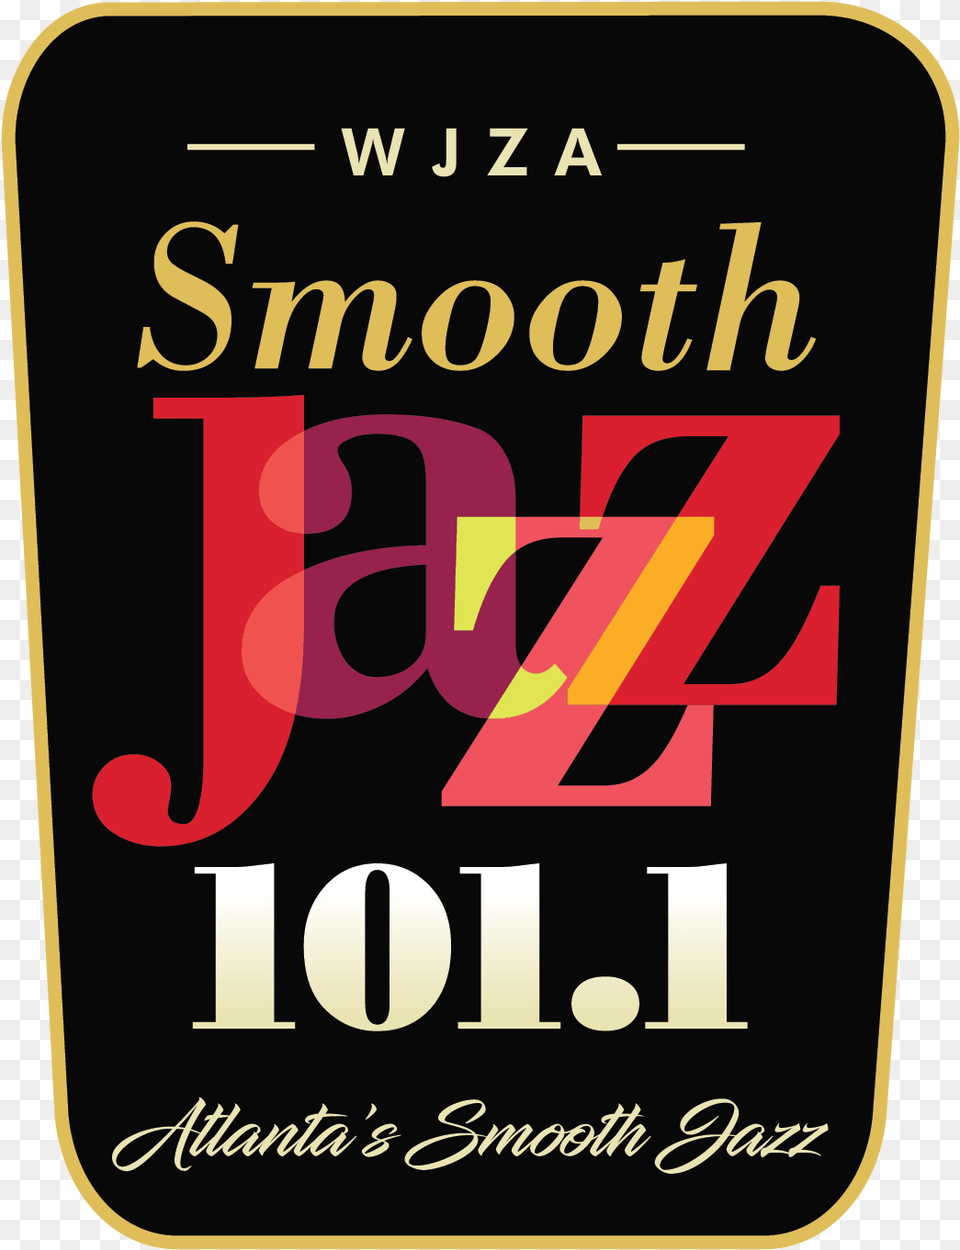 Wjza Smooth Jazz, Book, Publication, Advertisement Png Image